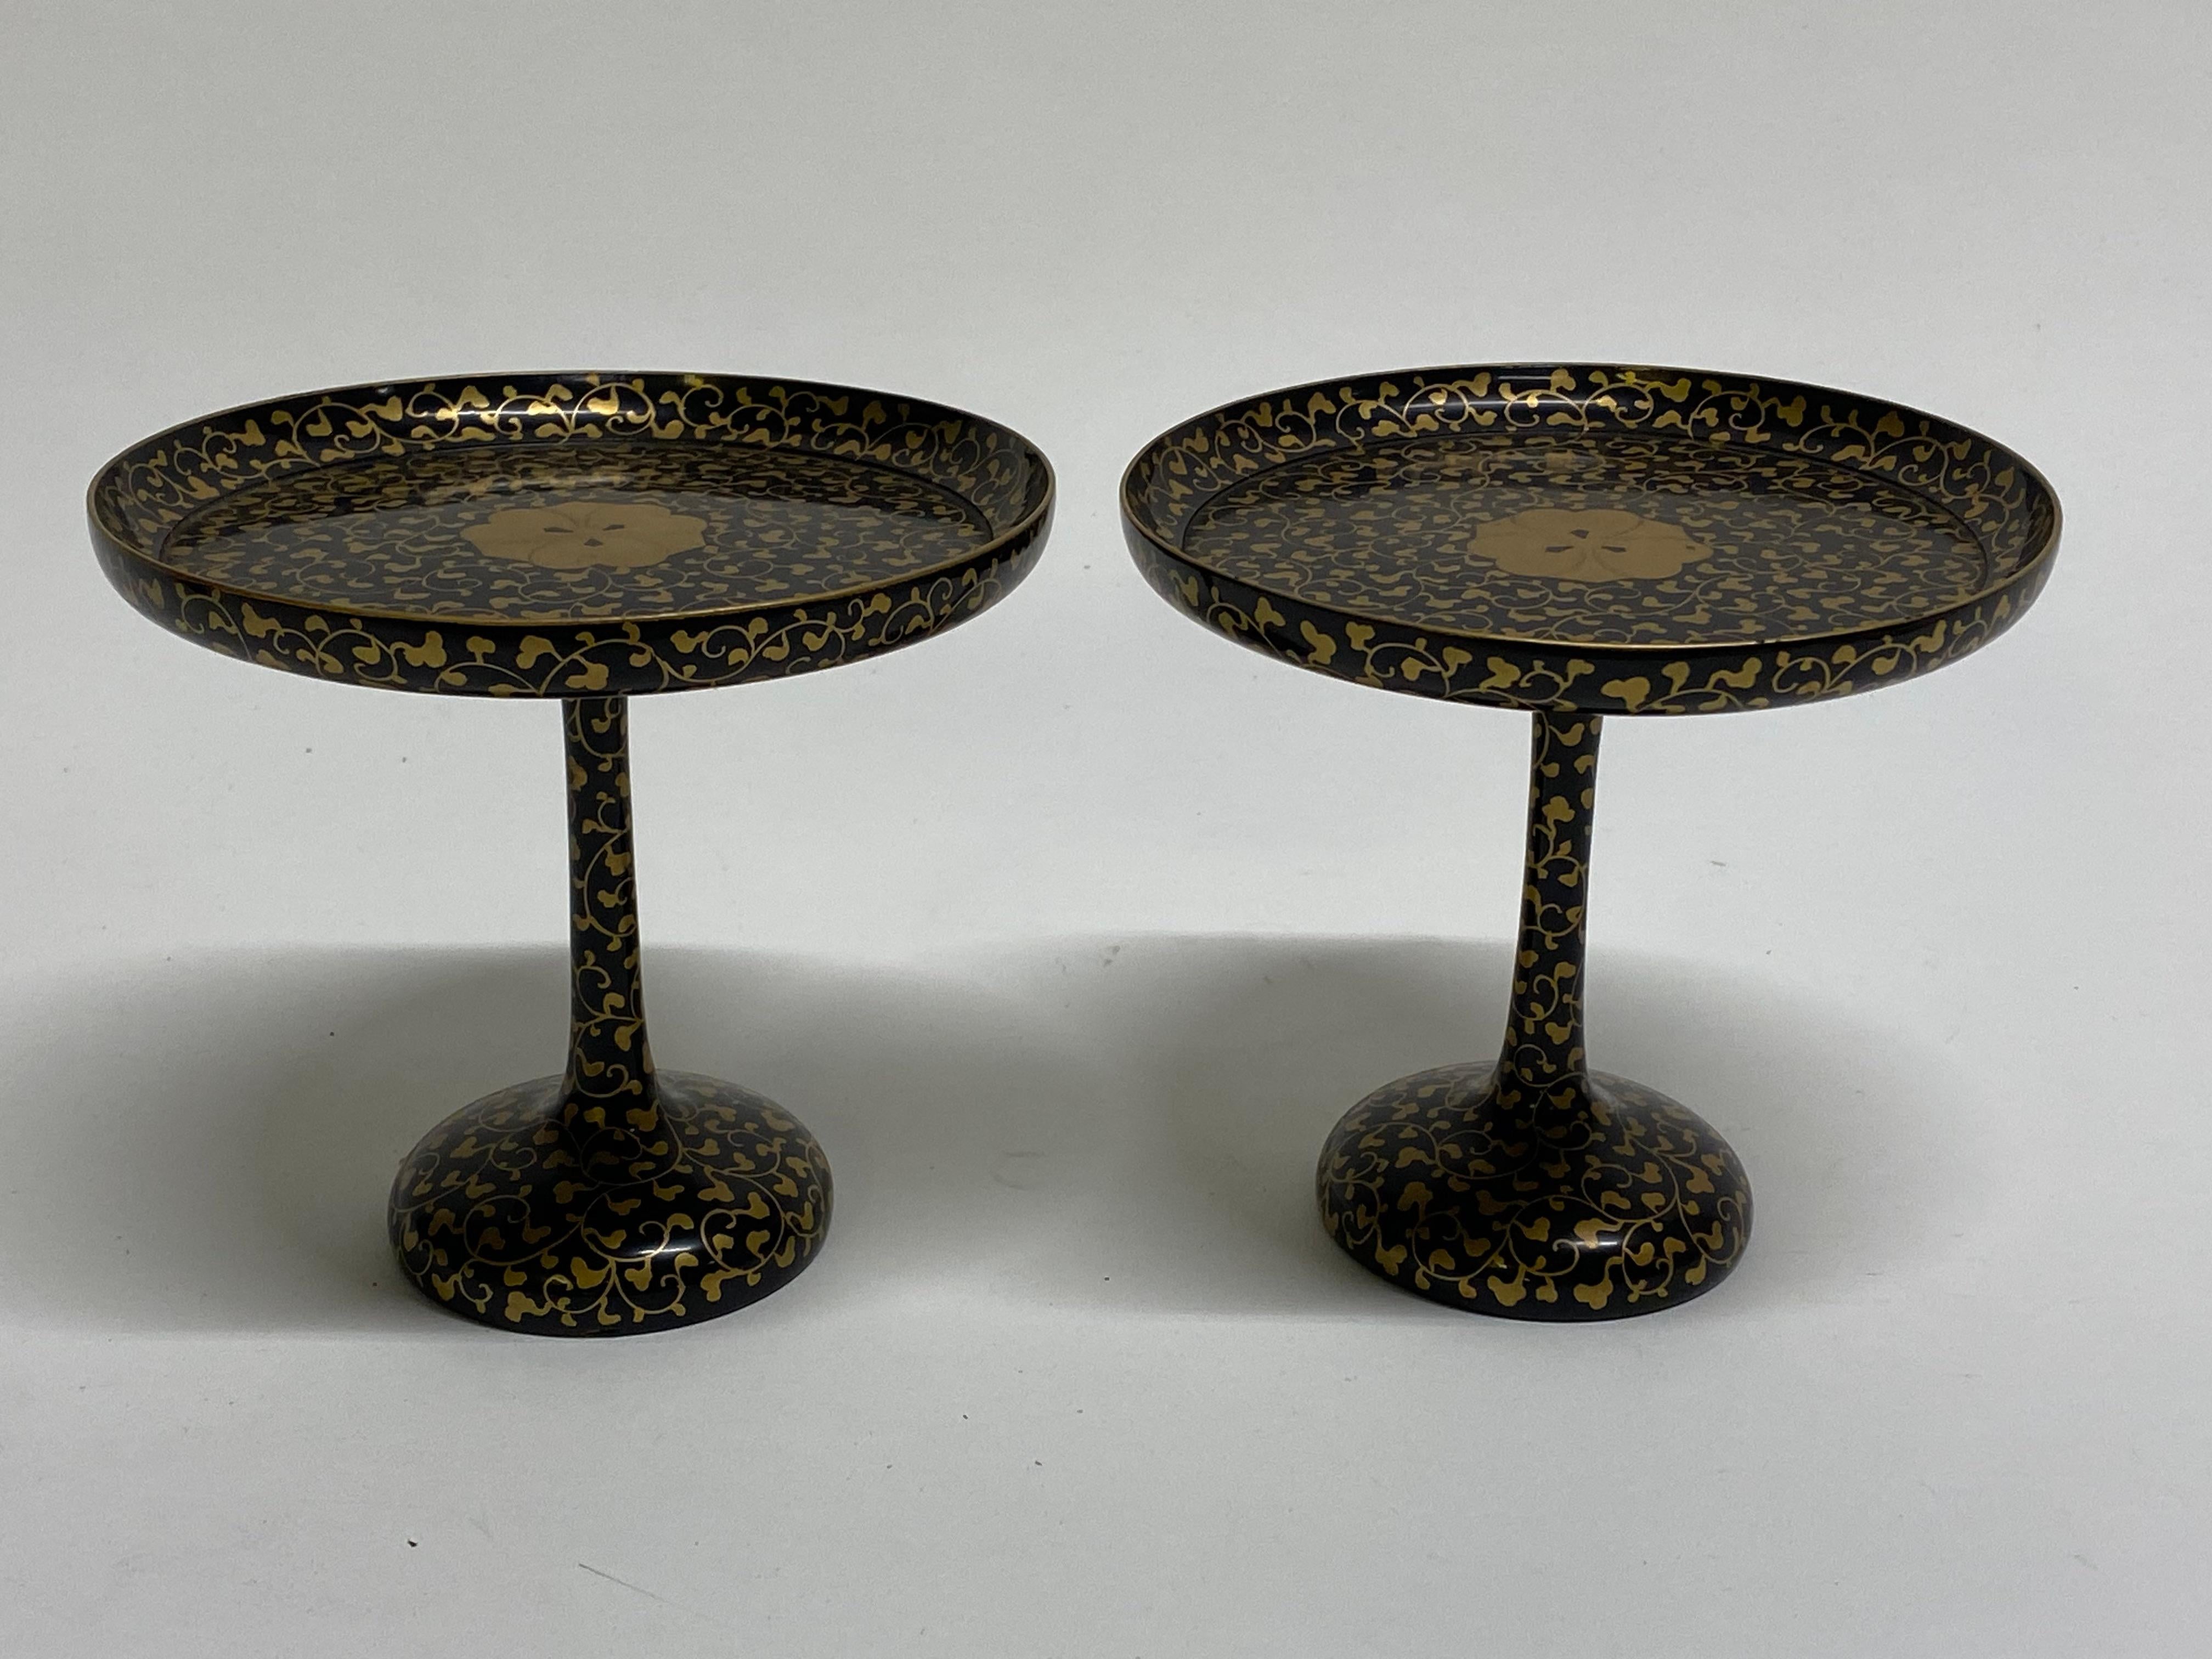 A simply gorgeous pair of Asian black lacquer and gold leaf floral decorated tazzas. A tazza can be just for decorative value, while a compote is used to hold something such as food. Delicate and beautiful hand decorated wood. Intricate interlacing